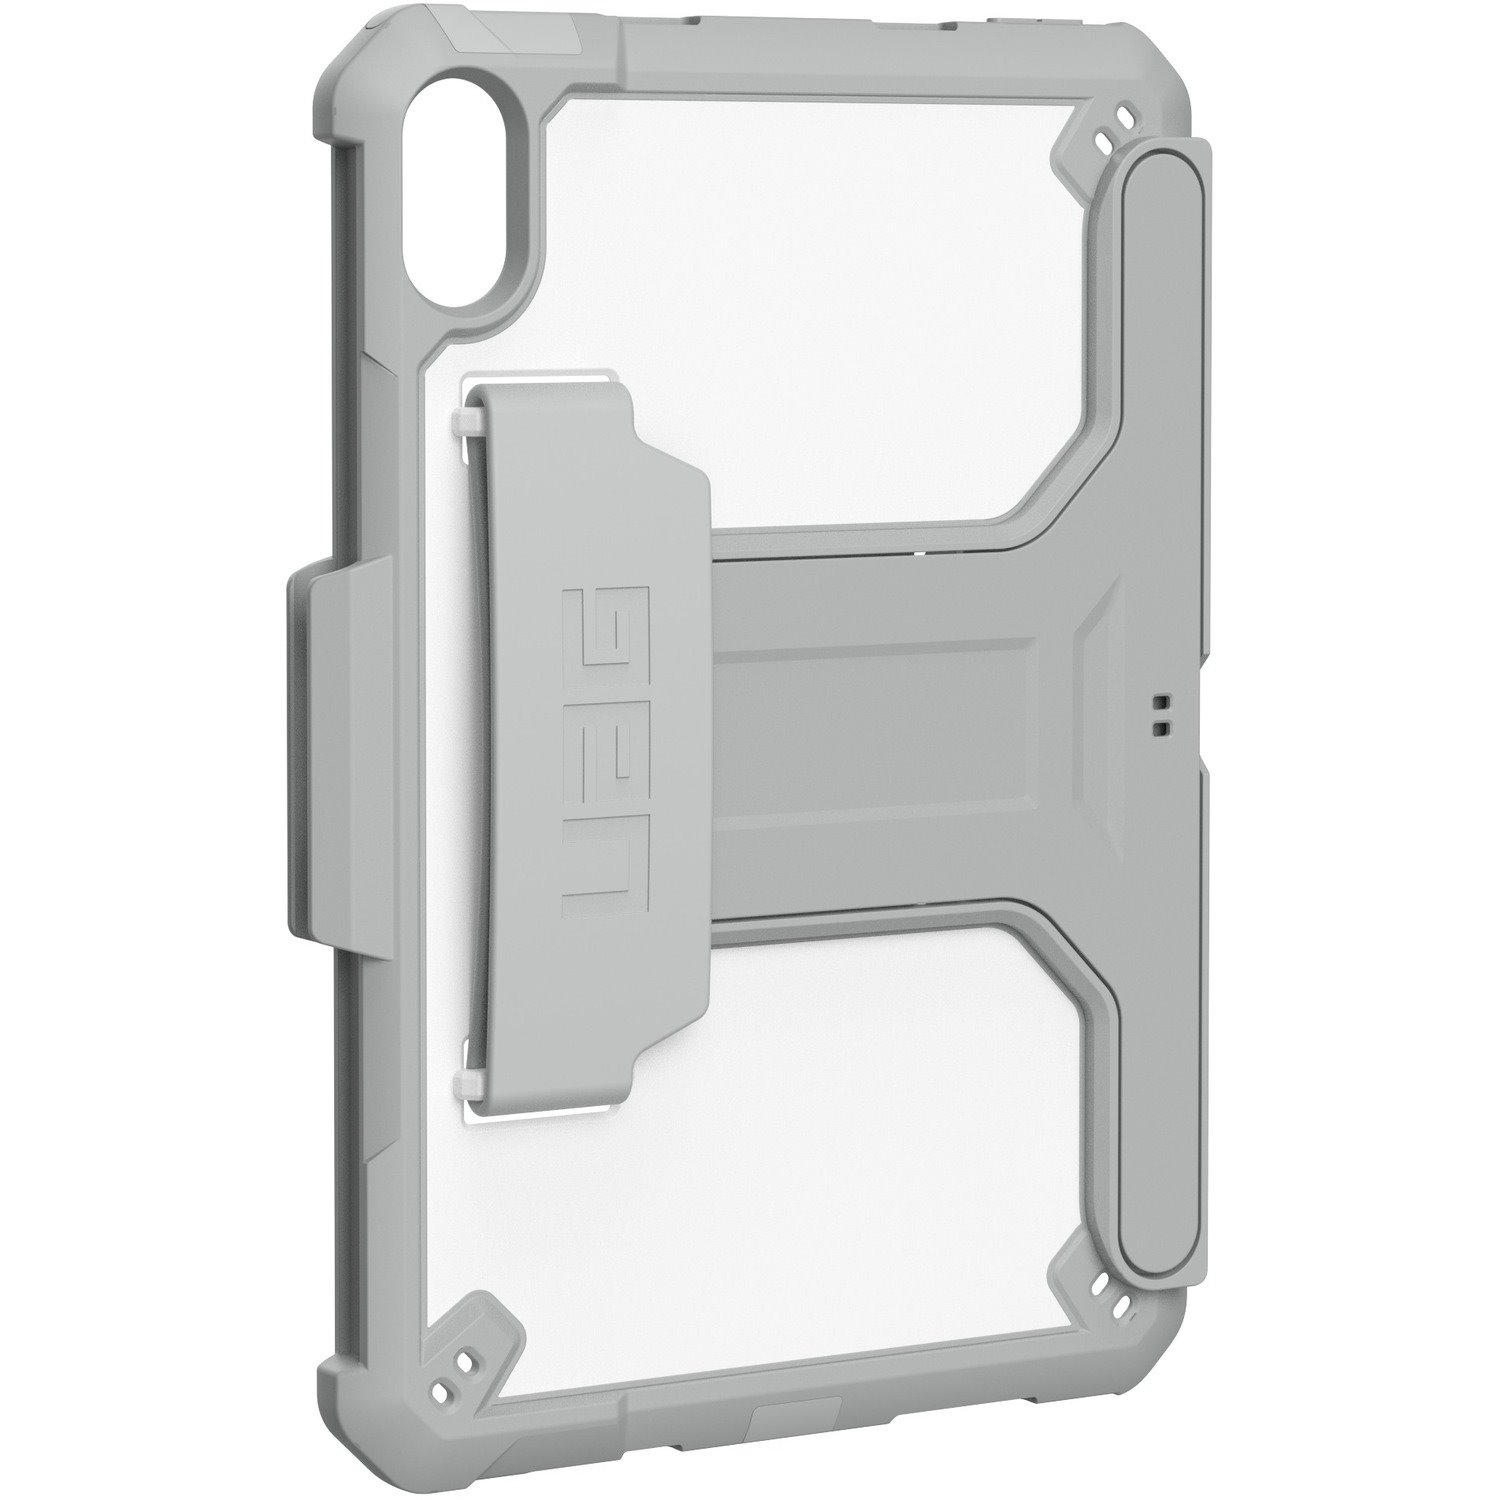 Urban Armor Gear Scout Rugged Case for Apple iPad mini (6th Generation) Tablet - White, Grey